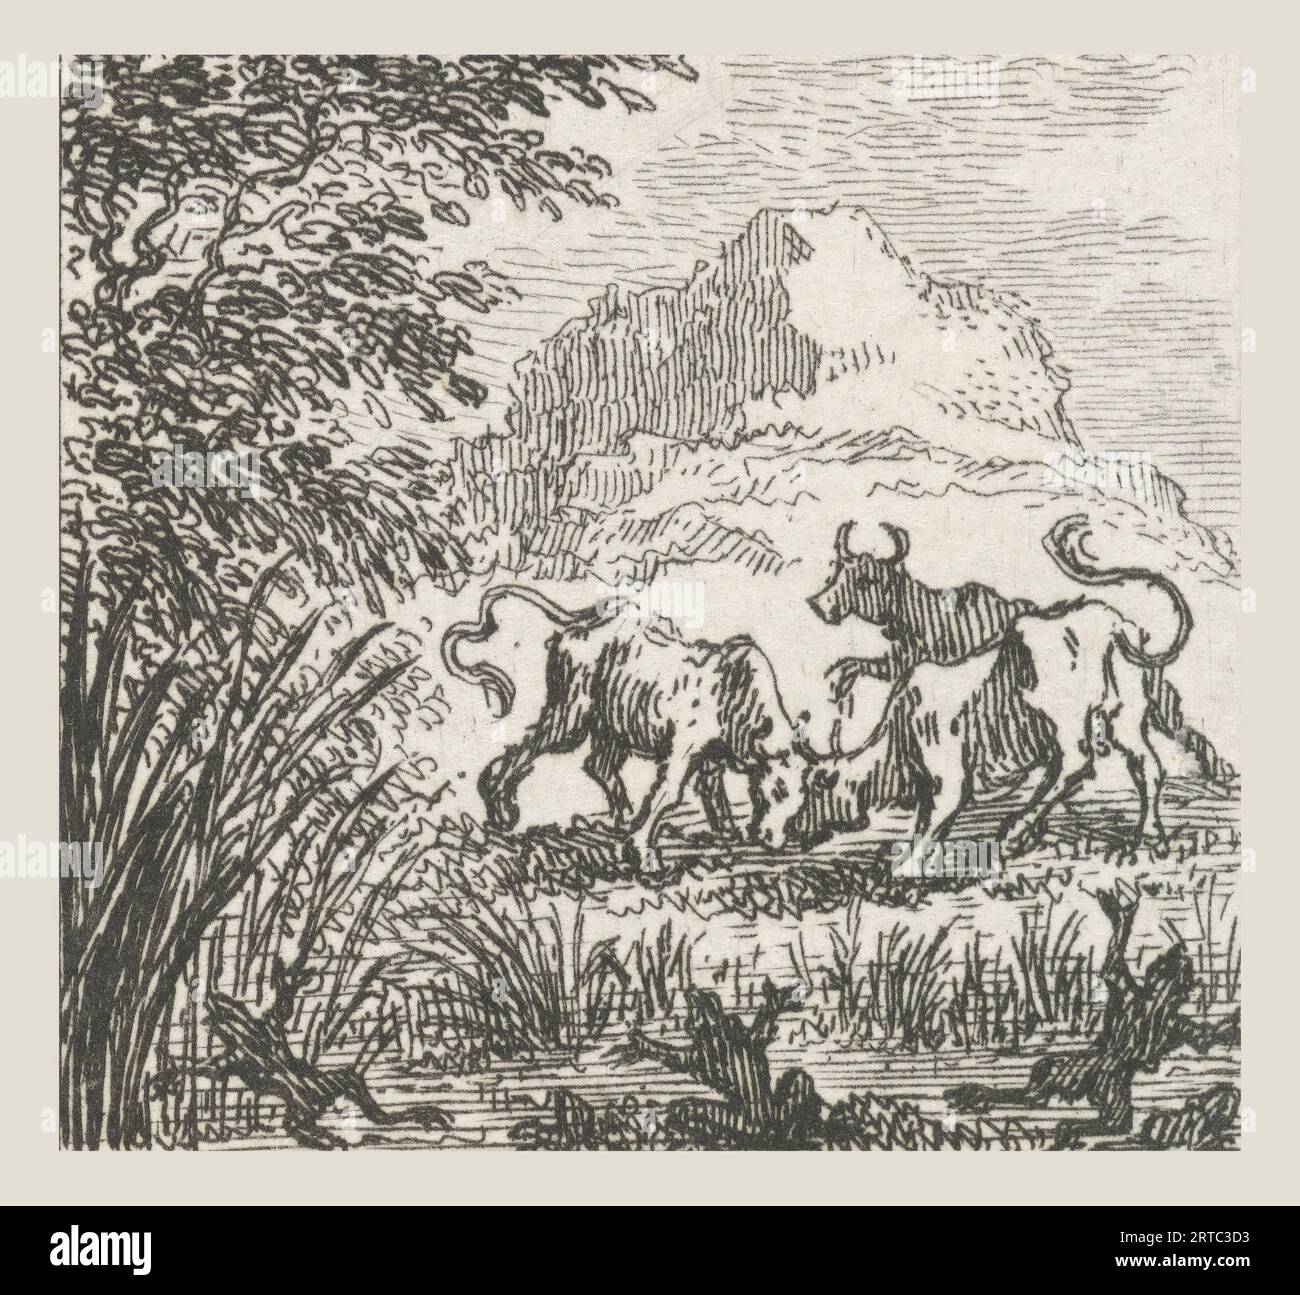 Fable of the bulls in battle Illustrations for fable stories of Phaedrus (series title), Three bulls are fighting in a meadow. This illustration was made for the Aesopian fables of the Latin poet Phaedrus, Fables. Simon Fokke (1712-1784) was a Dutch designer, etcher, and engraver. Born in Amsterdam, The Netherlands. Discover the enchanting world of Phaedrus' fables, where timeless wisdom meets captivating storytelling. In 'The Fables of Phaedrus,' you'll embark on a journey through the vivid landscapes of ancient Rome, where clever animals and cunning characters engage in delightful adventures Stock Photo